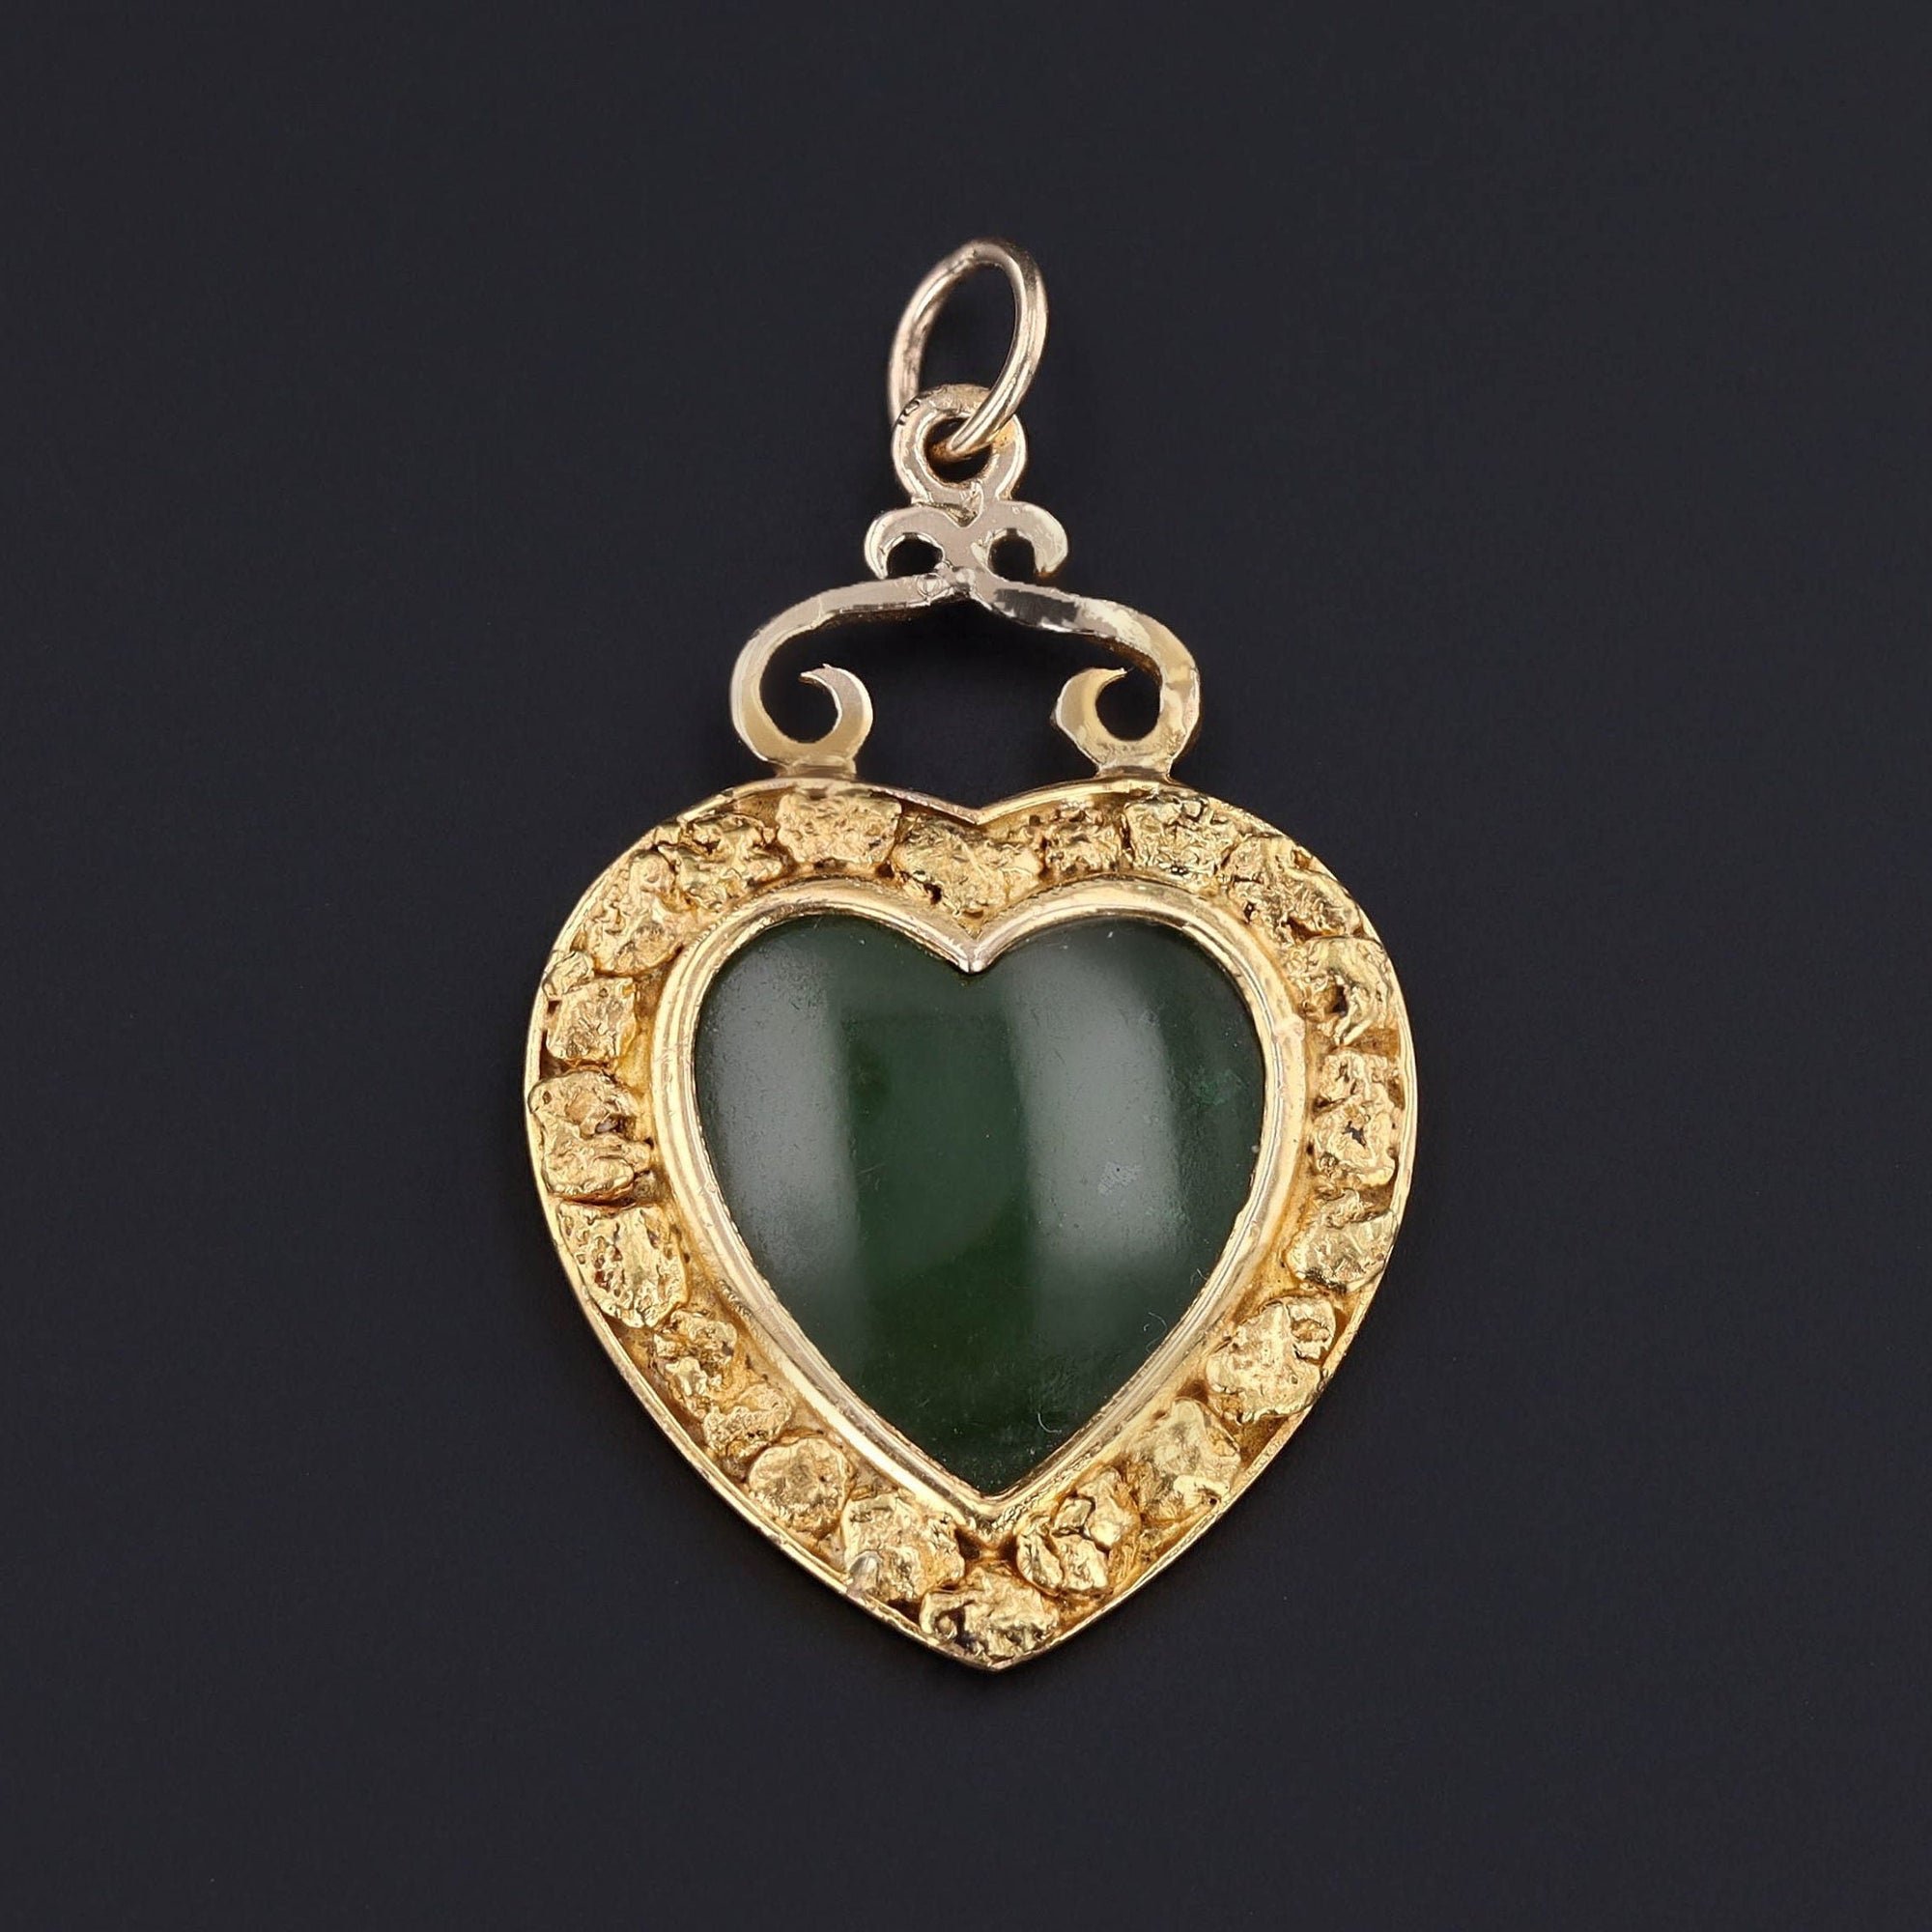 Antique Jade Heart Pendant | 14k Gold Nugget and Jade Heart 